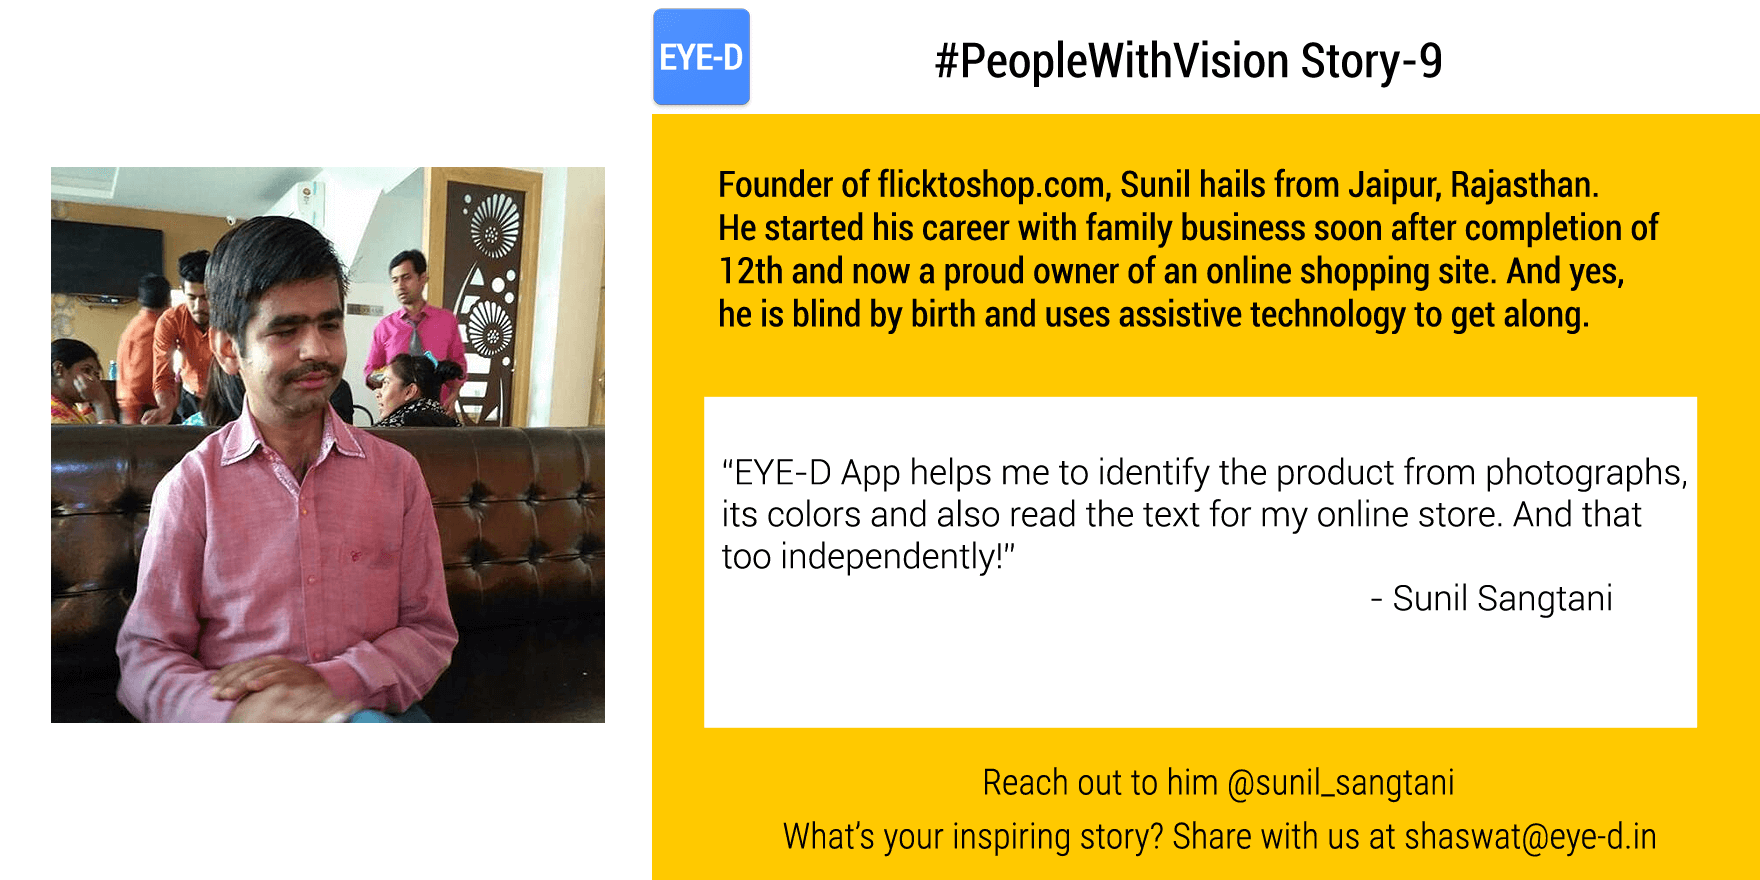 Sunil's #PeopleWithVision Story speaks about his journey as an entrepreneur despite blindness. It also talks about Eye-D App with Sunil uses to decipher images and the text on them for his e-commerce website.